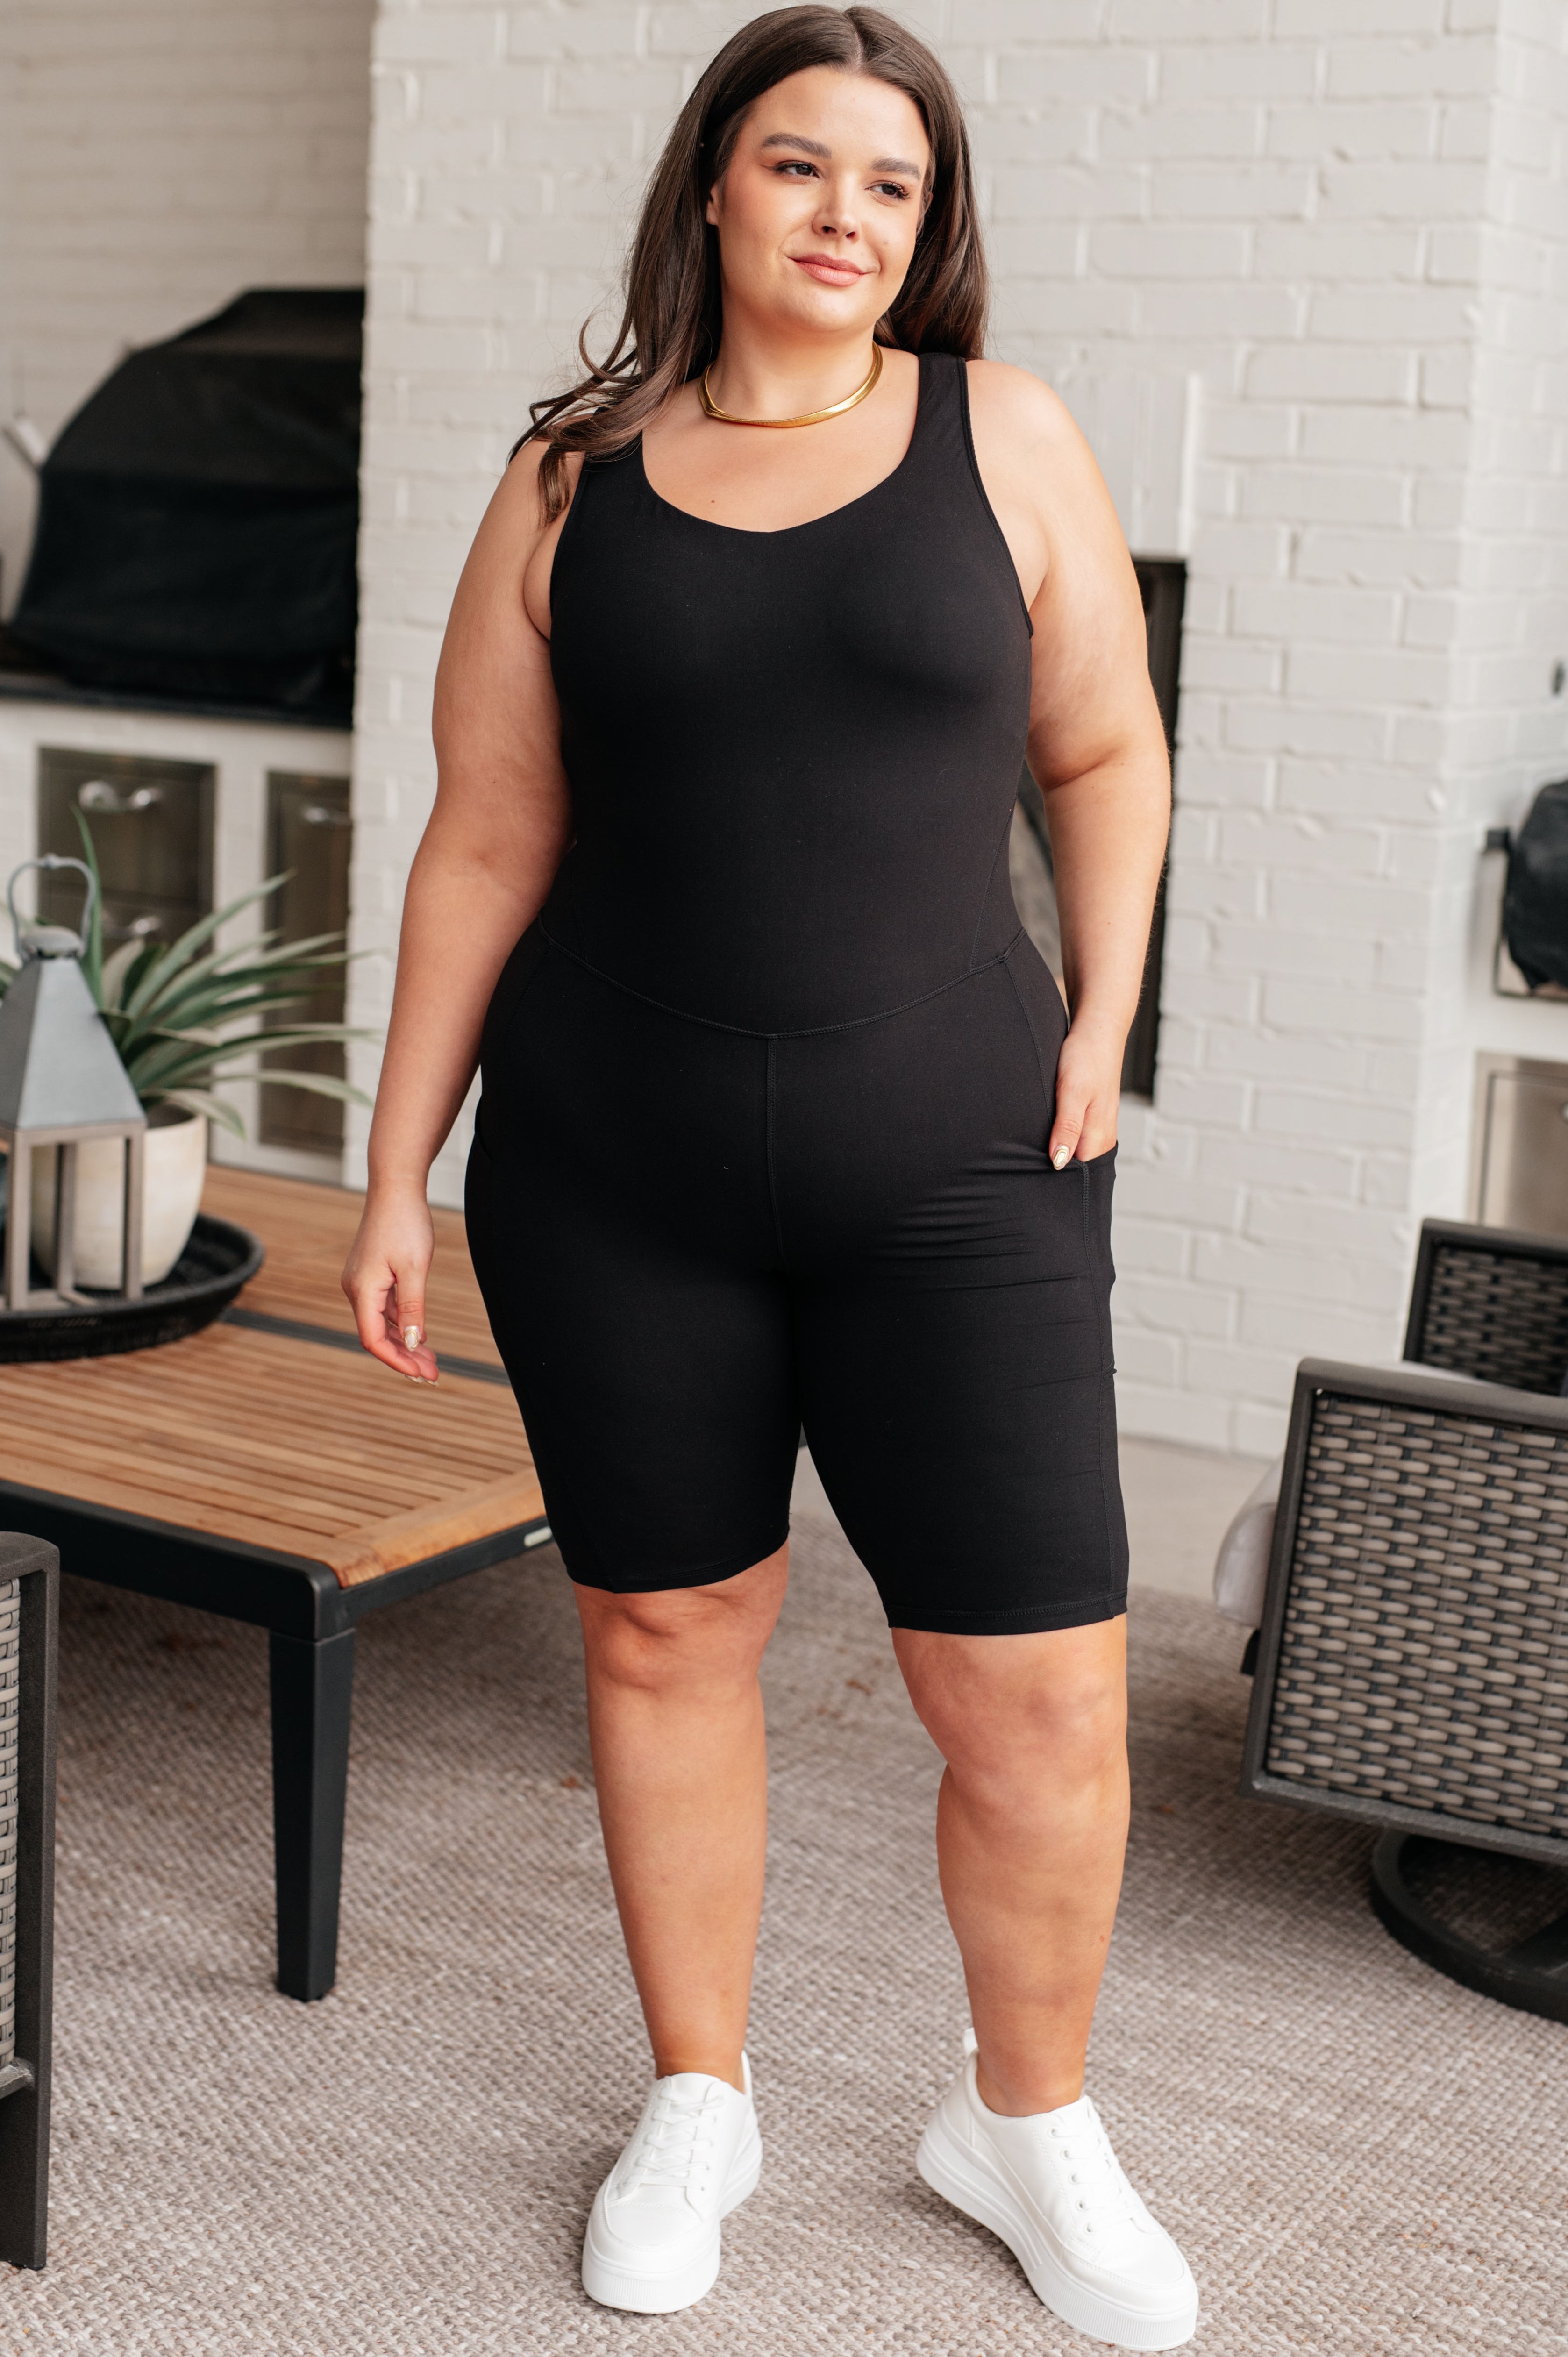 Sun Salutations Body Suit in Black Athleisure Ave Shops   